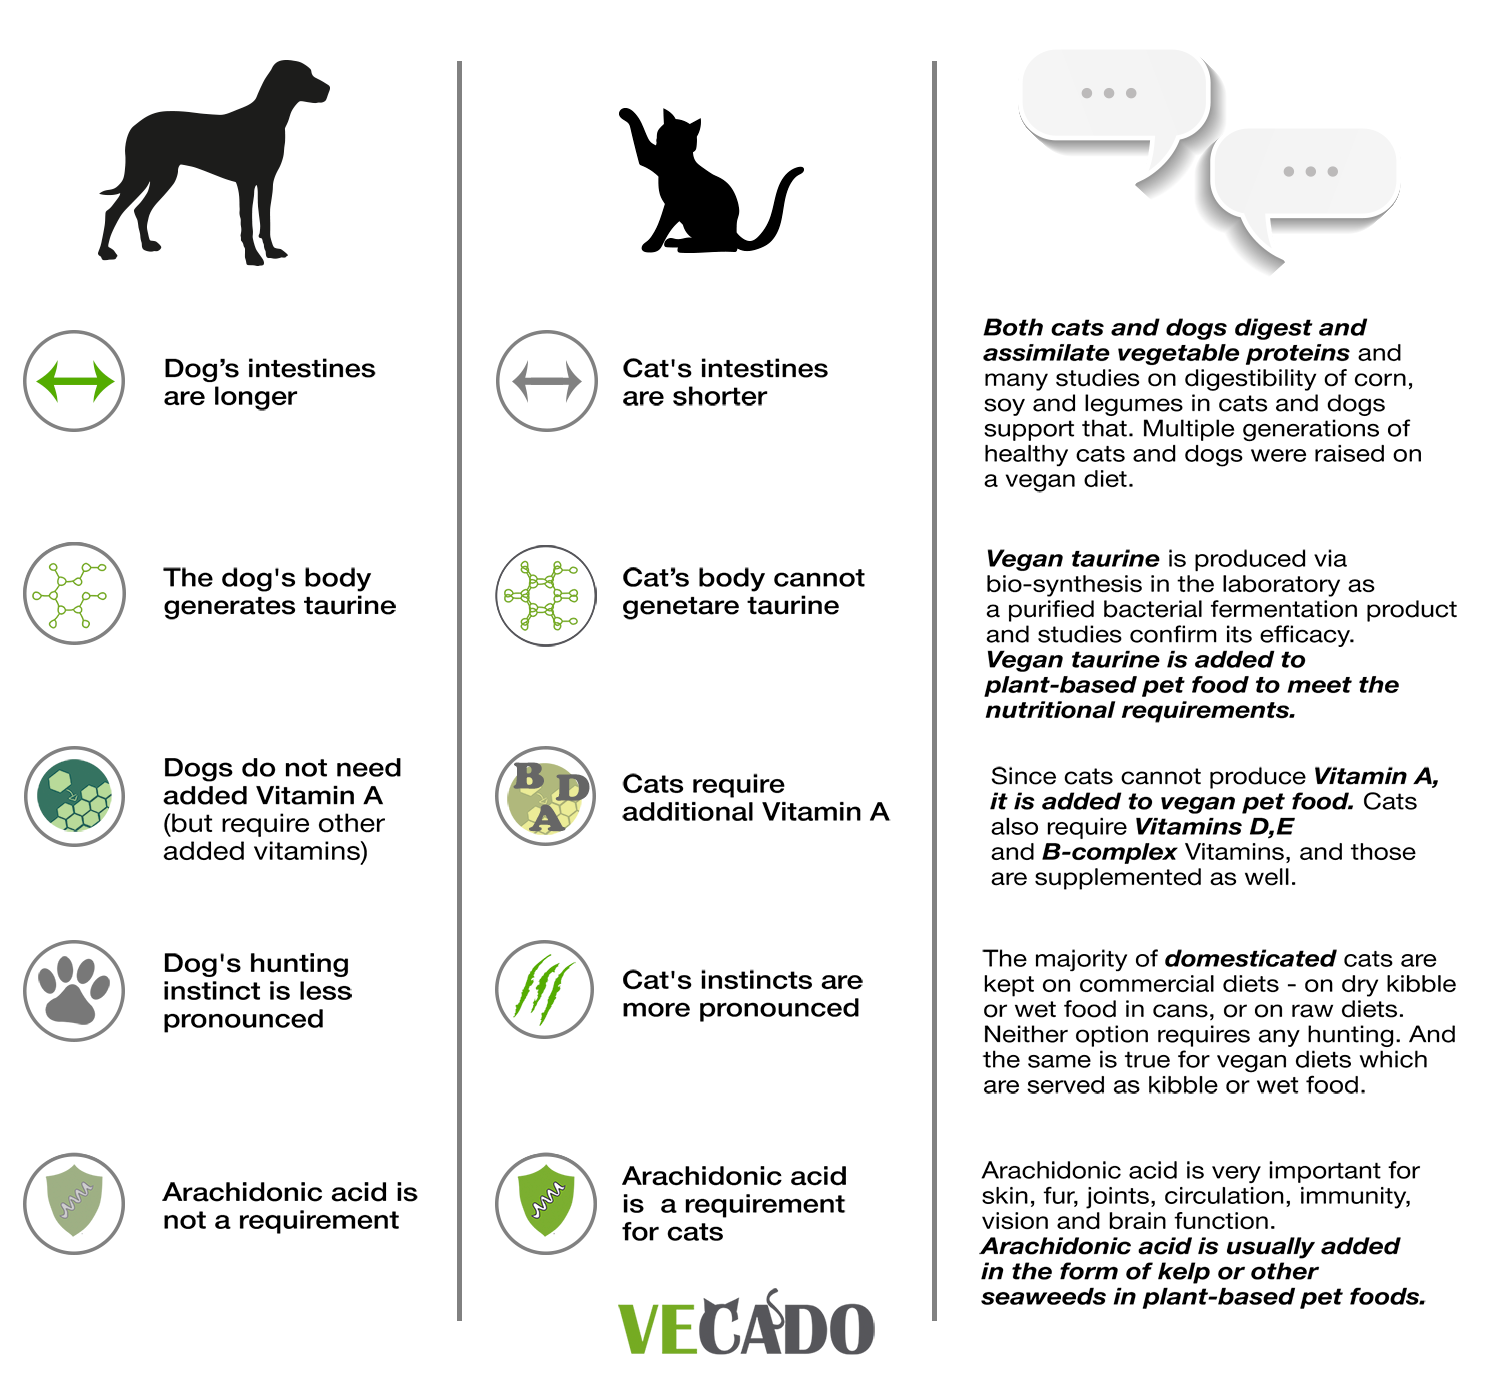 comparison of physiology of cats and dogs and appropriateness of vegan diets